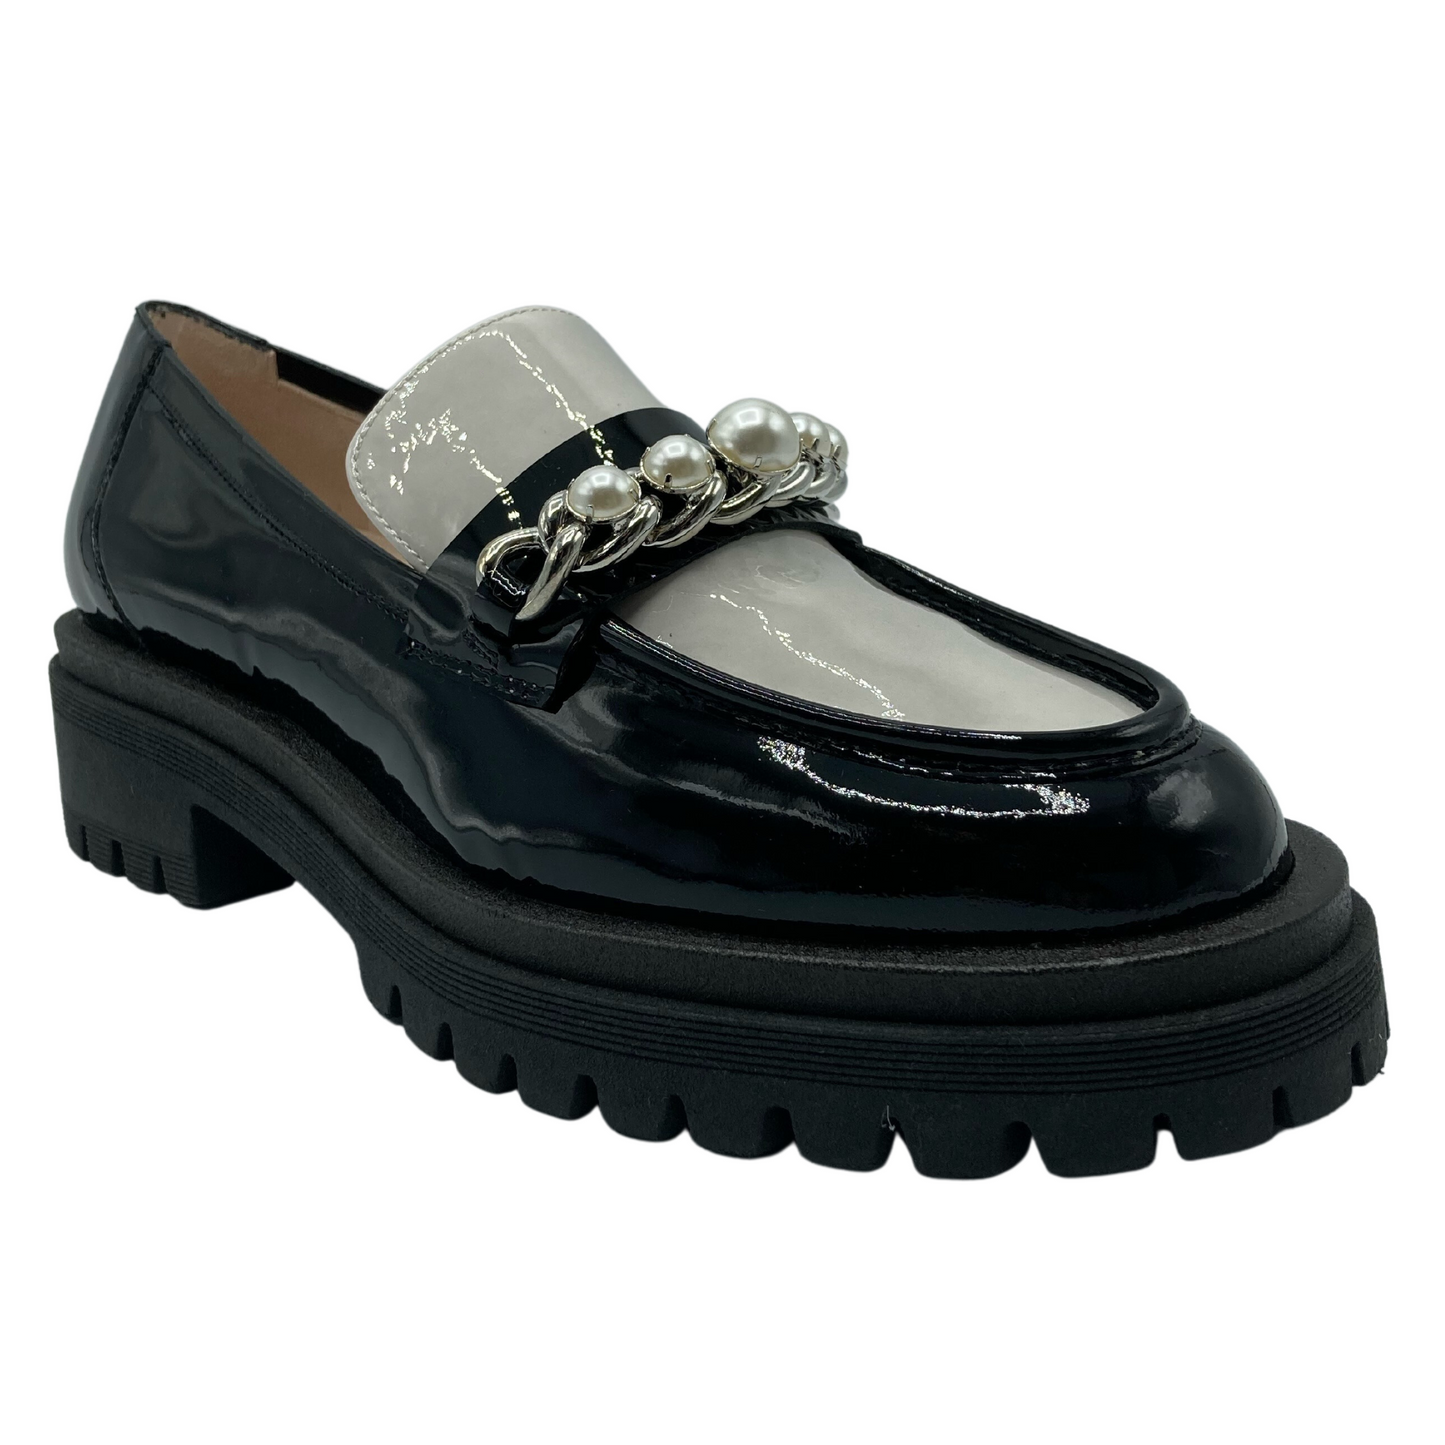 45 degree angled view of patent leather loafer with black and white upper. Lug rubber outsole and pearl and chain detail on the upper